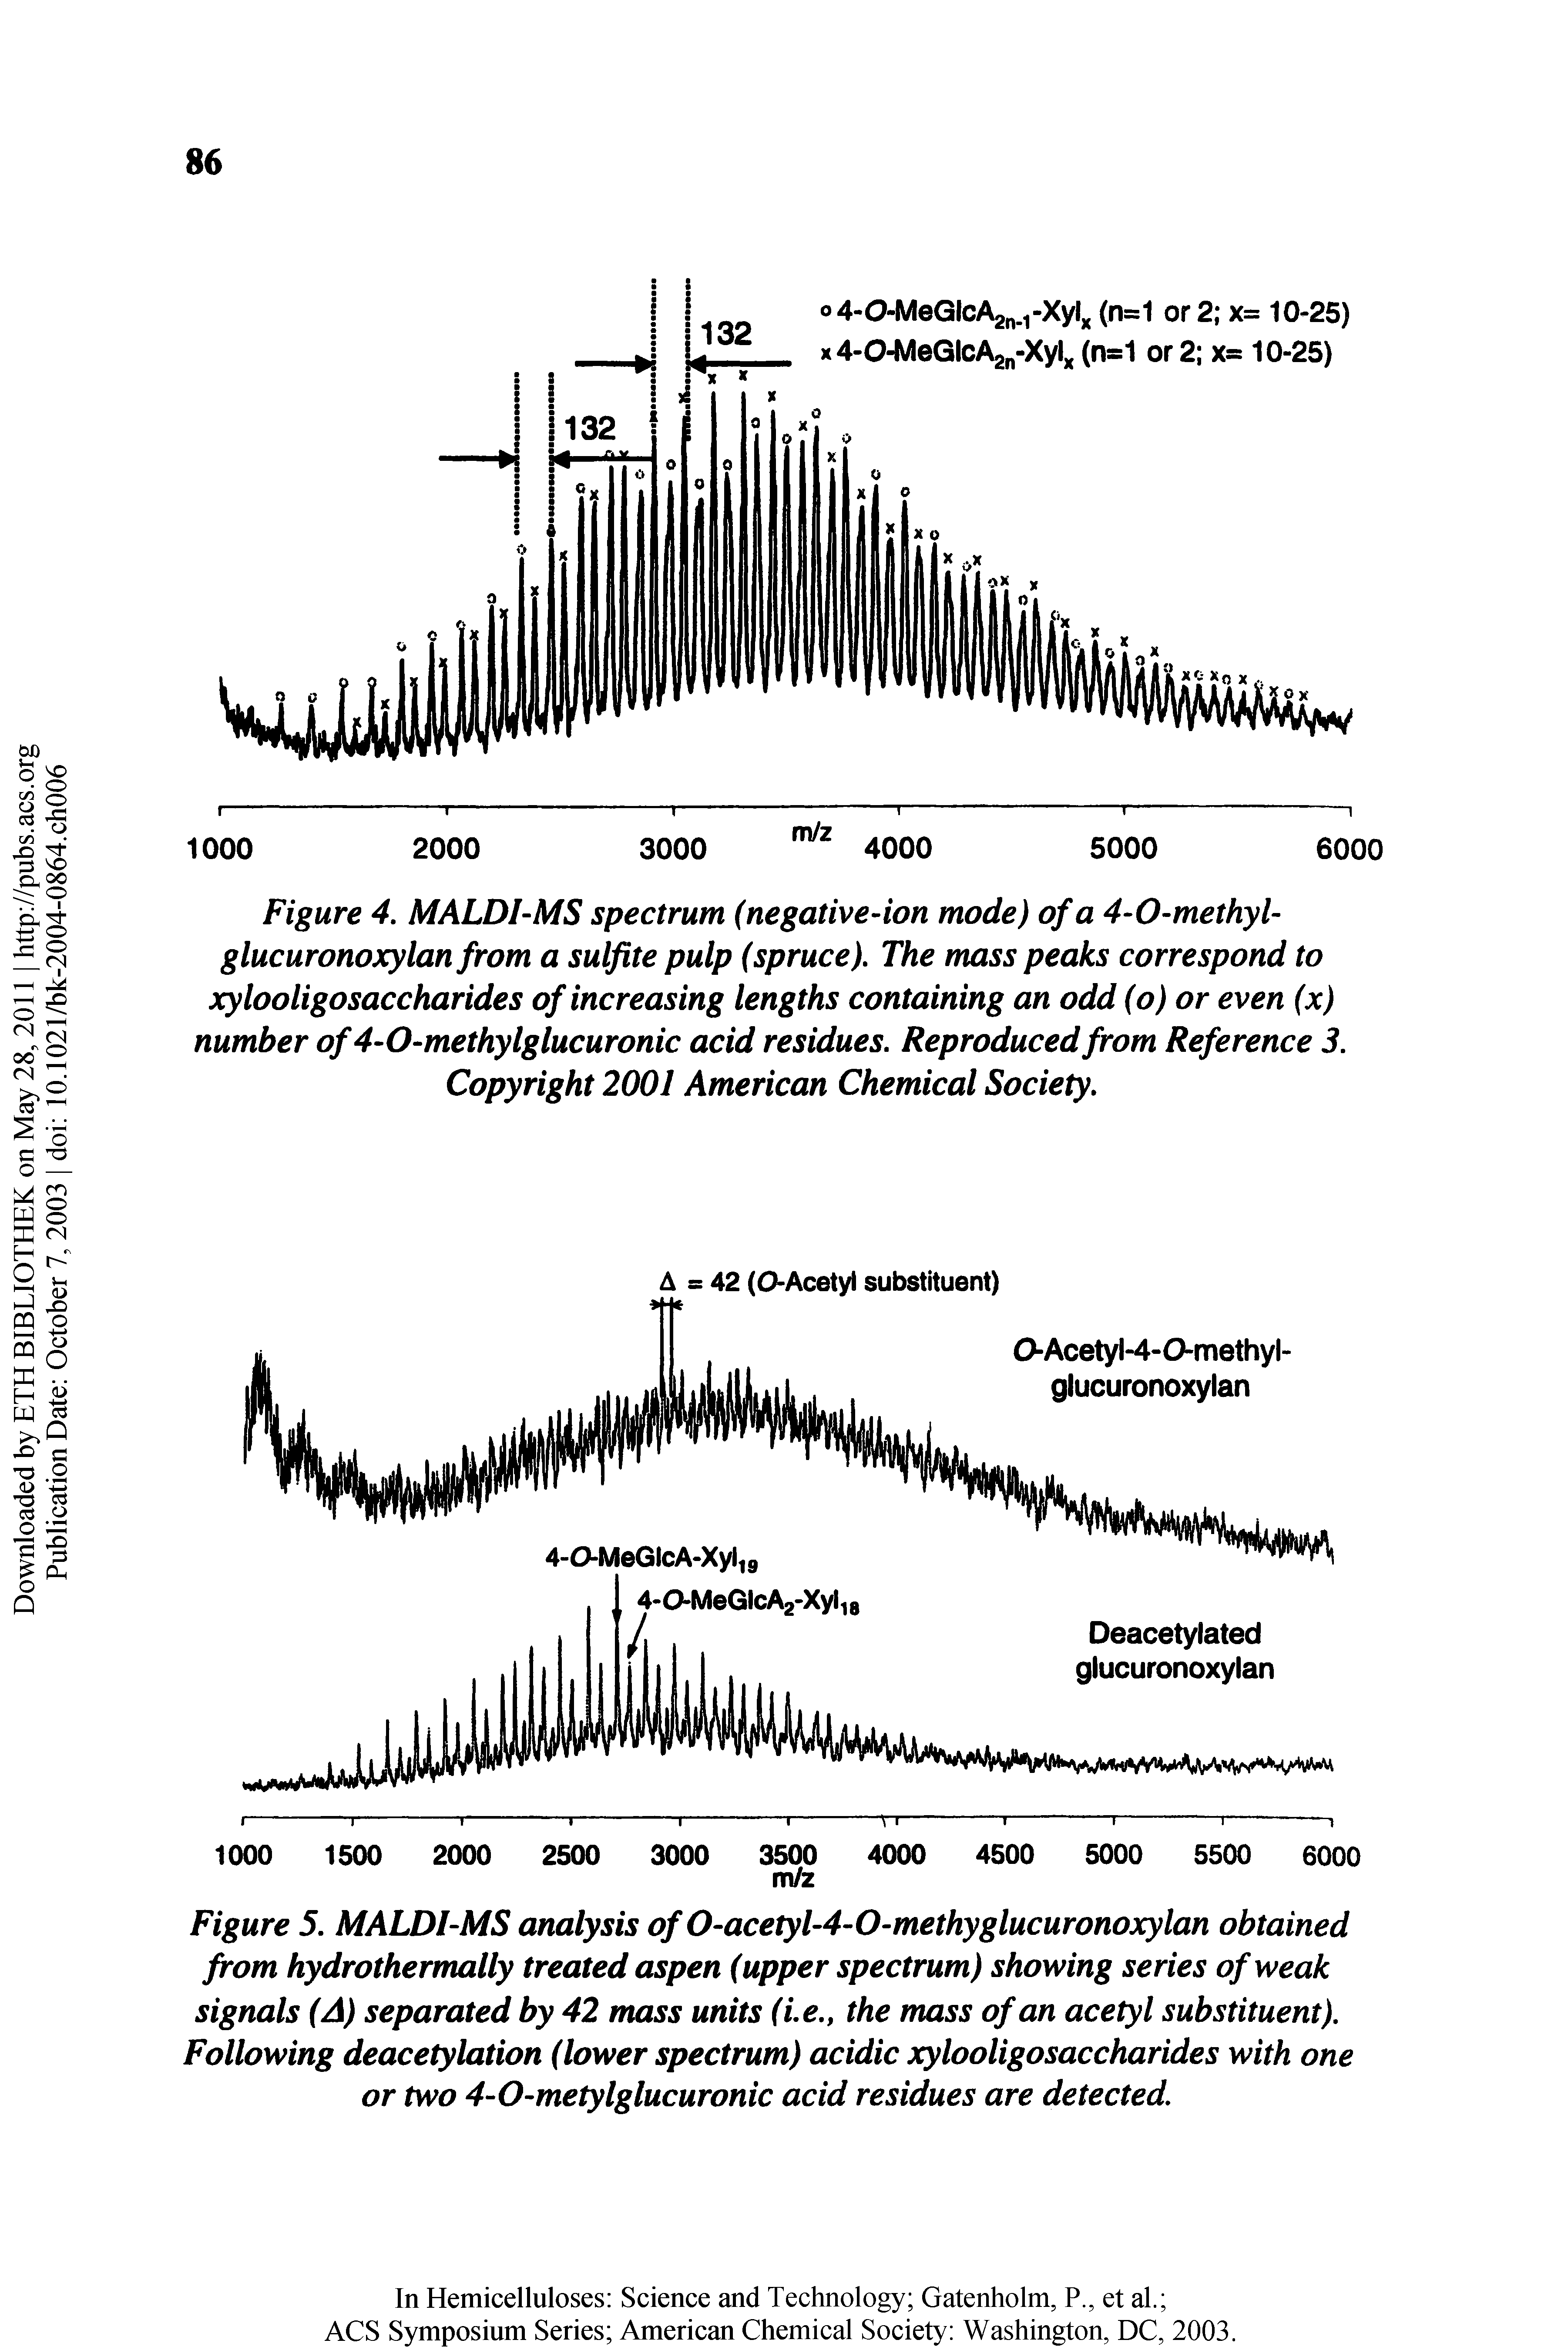 Figure 4. MALDI-MS spectrum (negative-ion mode) of a 4-0-methyl-glucuronoxylan from a sulfite pulp (spruce). The mass peaks correspond to xylooligosaccharides of increasing lengths containing an odd (o) or even (x) number of4-0-methylglucuronic acid residues. Reproduced from Reference 3, Copyright 2001 American Chemical Society,...